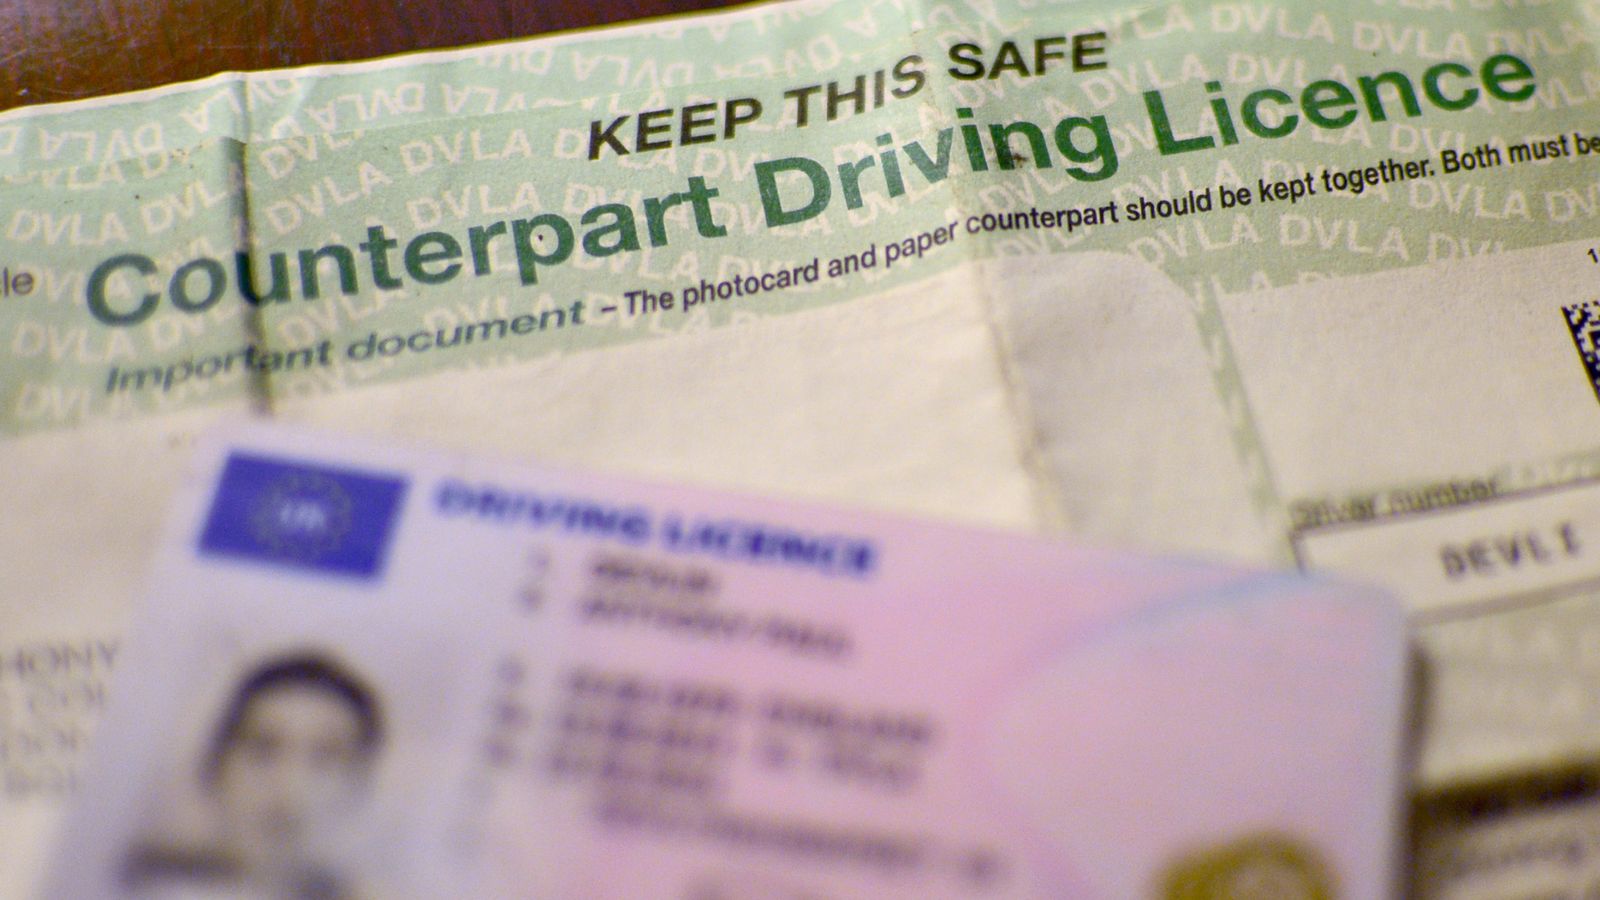 Three million driving licence delays since April 2020, MPs' report finds